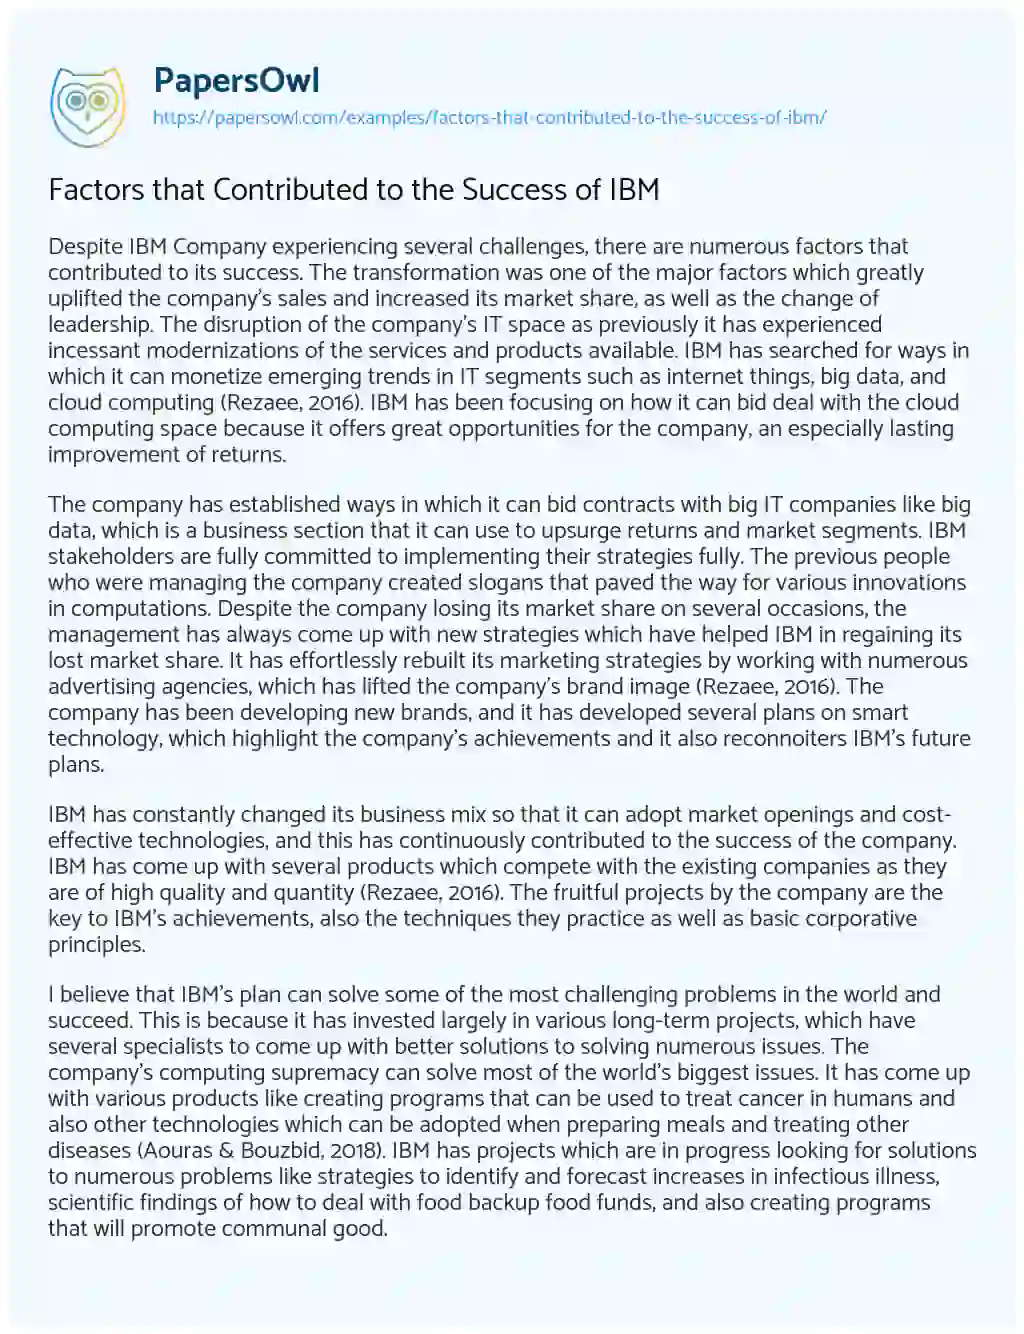 Essay on Factors that Contributed to the Success of IBM